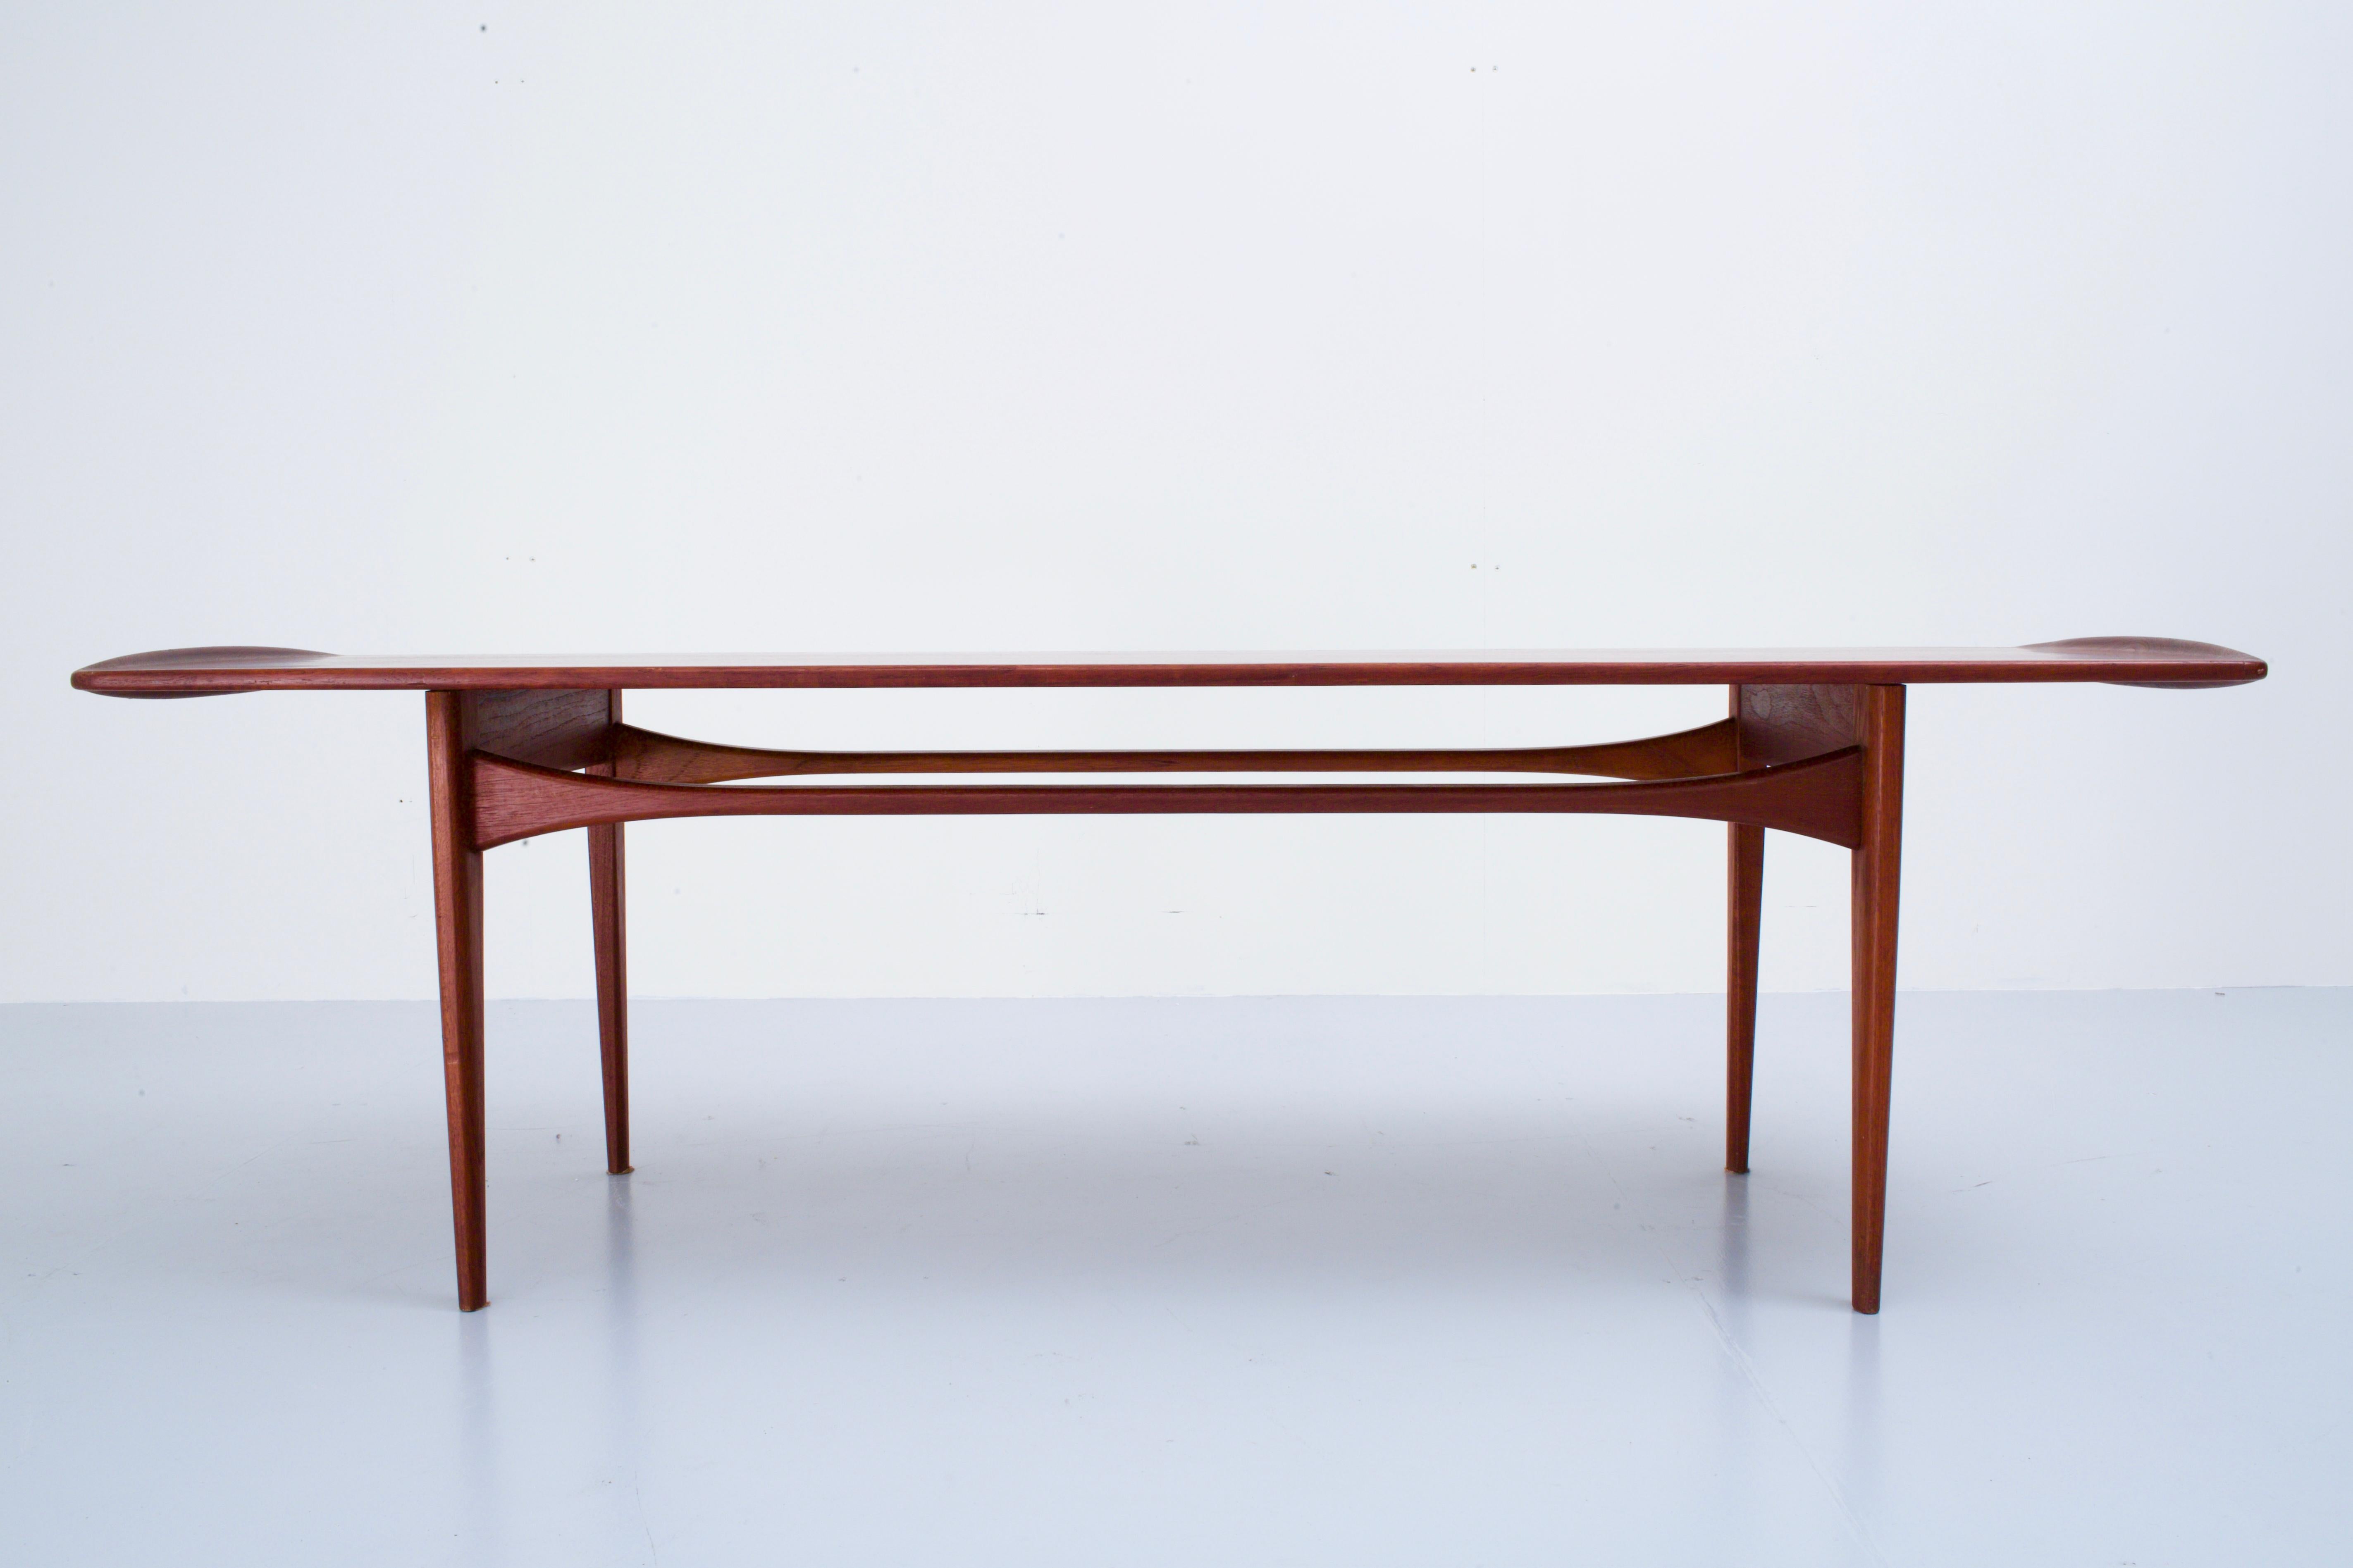 Tove & Edvard Kindt-Larsen teak coffee table for France & Daverkosen, Denmark, 1960s.

This famous coffee table is still in very good condition, especially the teak wood has aged very nicely over the years. The shape of the top, with it's distinct